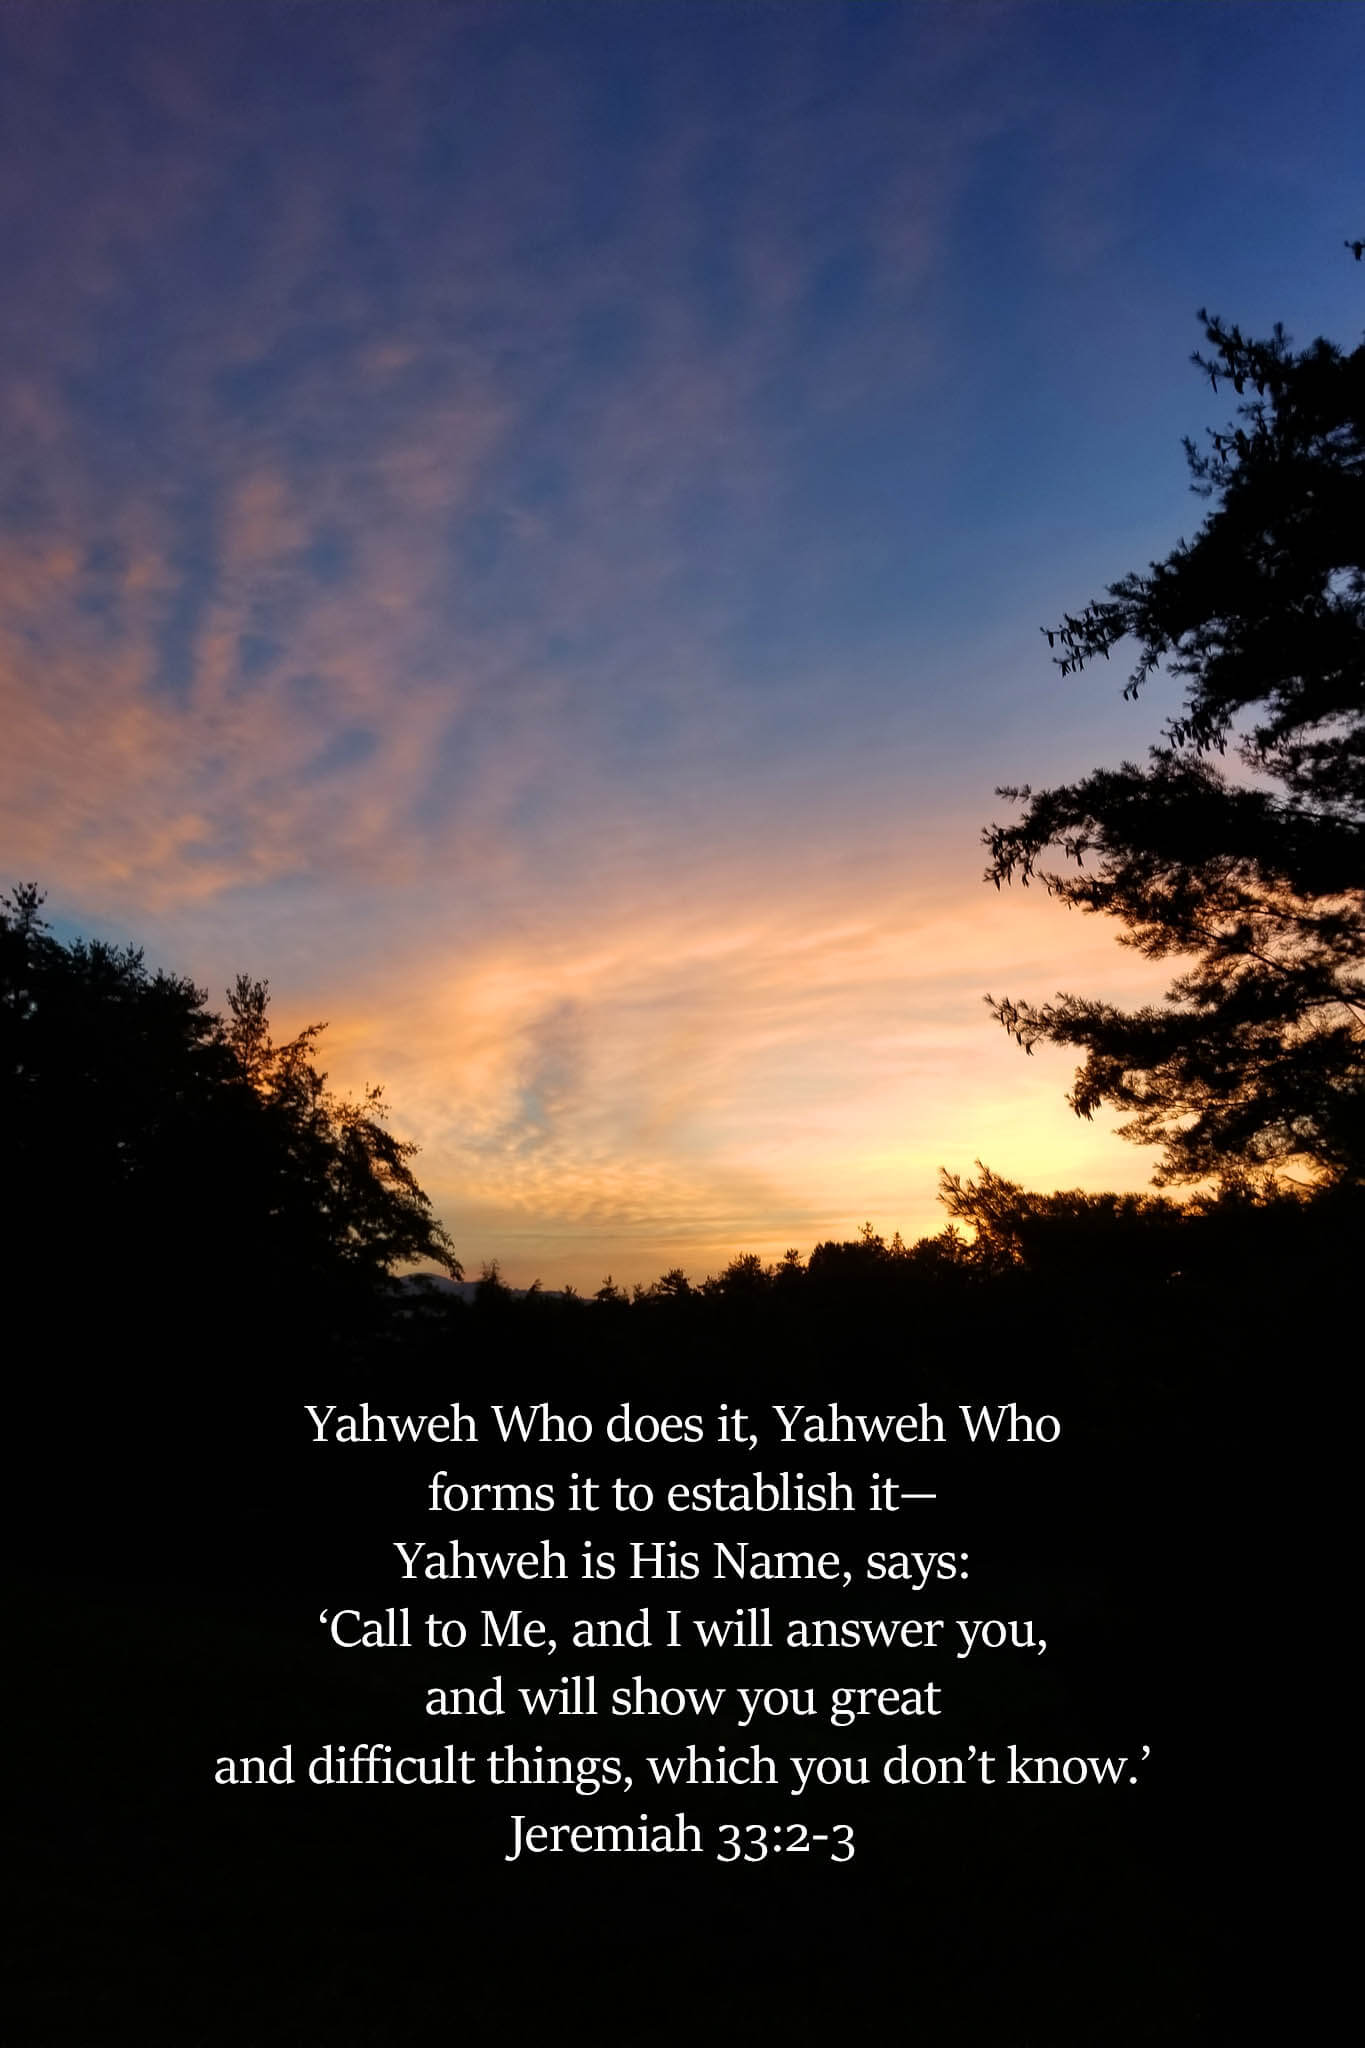 Jeremiah 33:2-3 Valley Sunset Christian greeting card